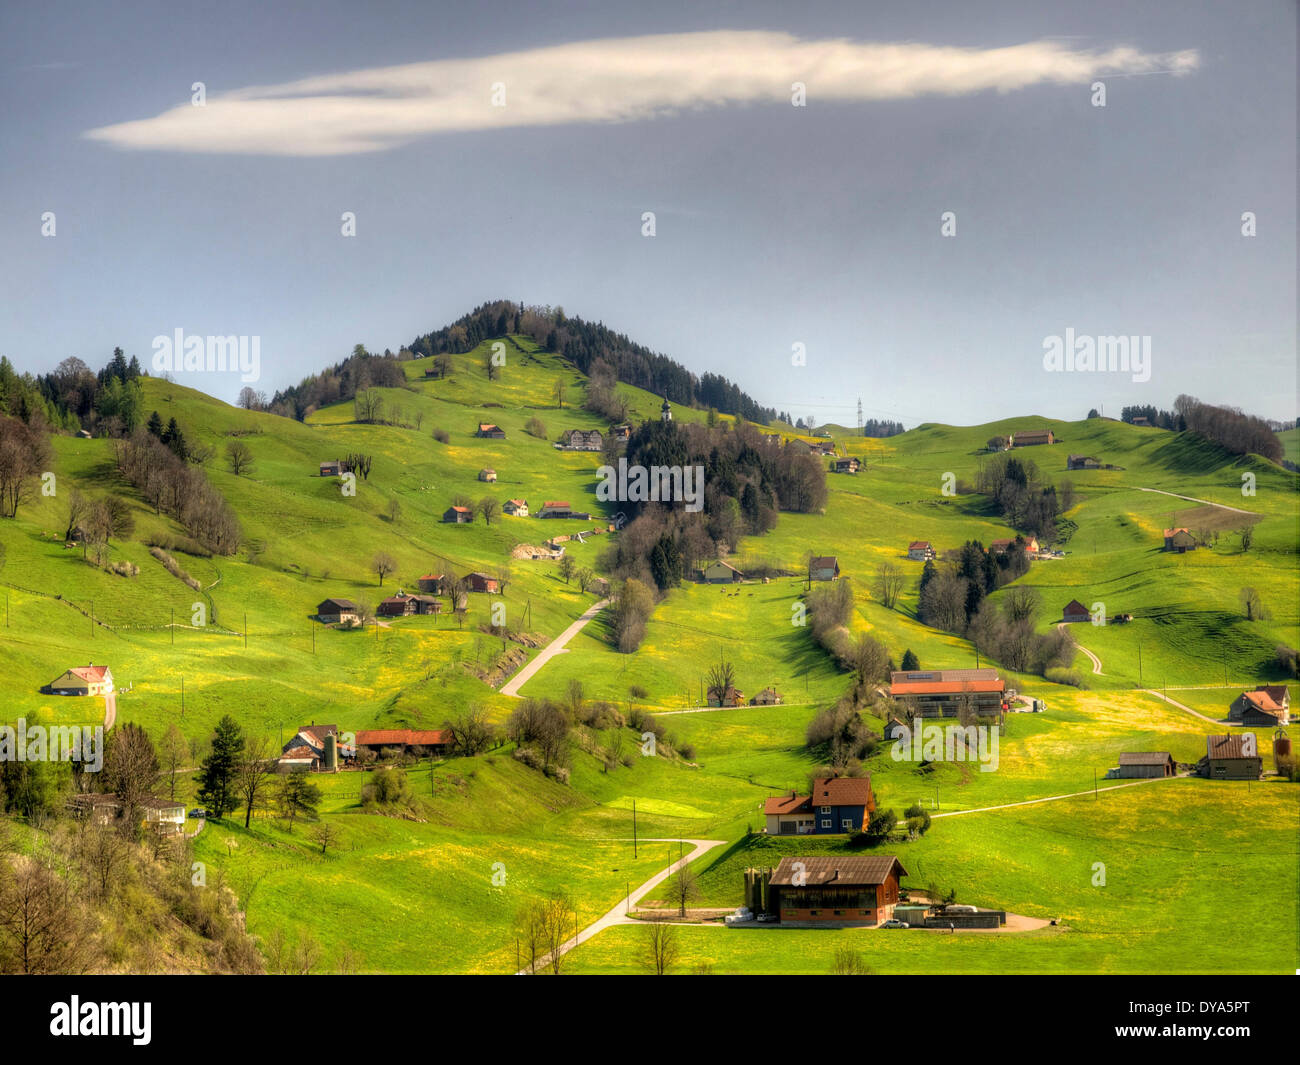 Switzerland, Europe, Appenzell, farms, agriculture, village, hill, rural, cloud Stock Photo